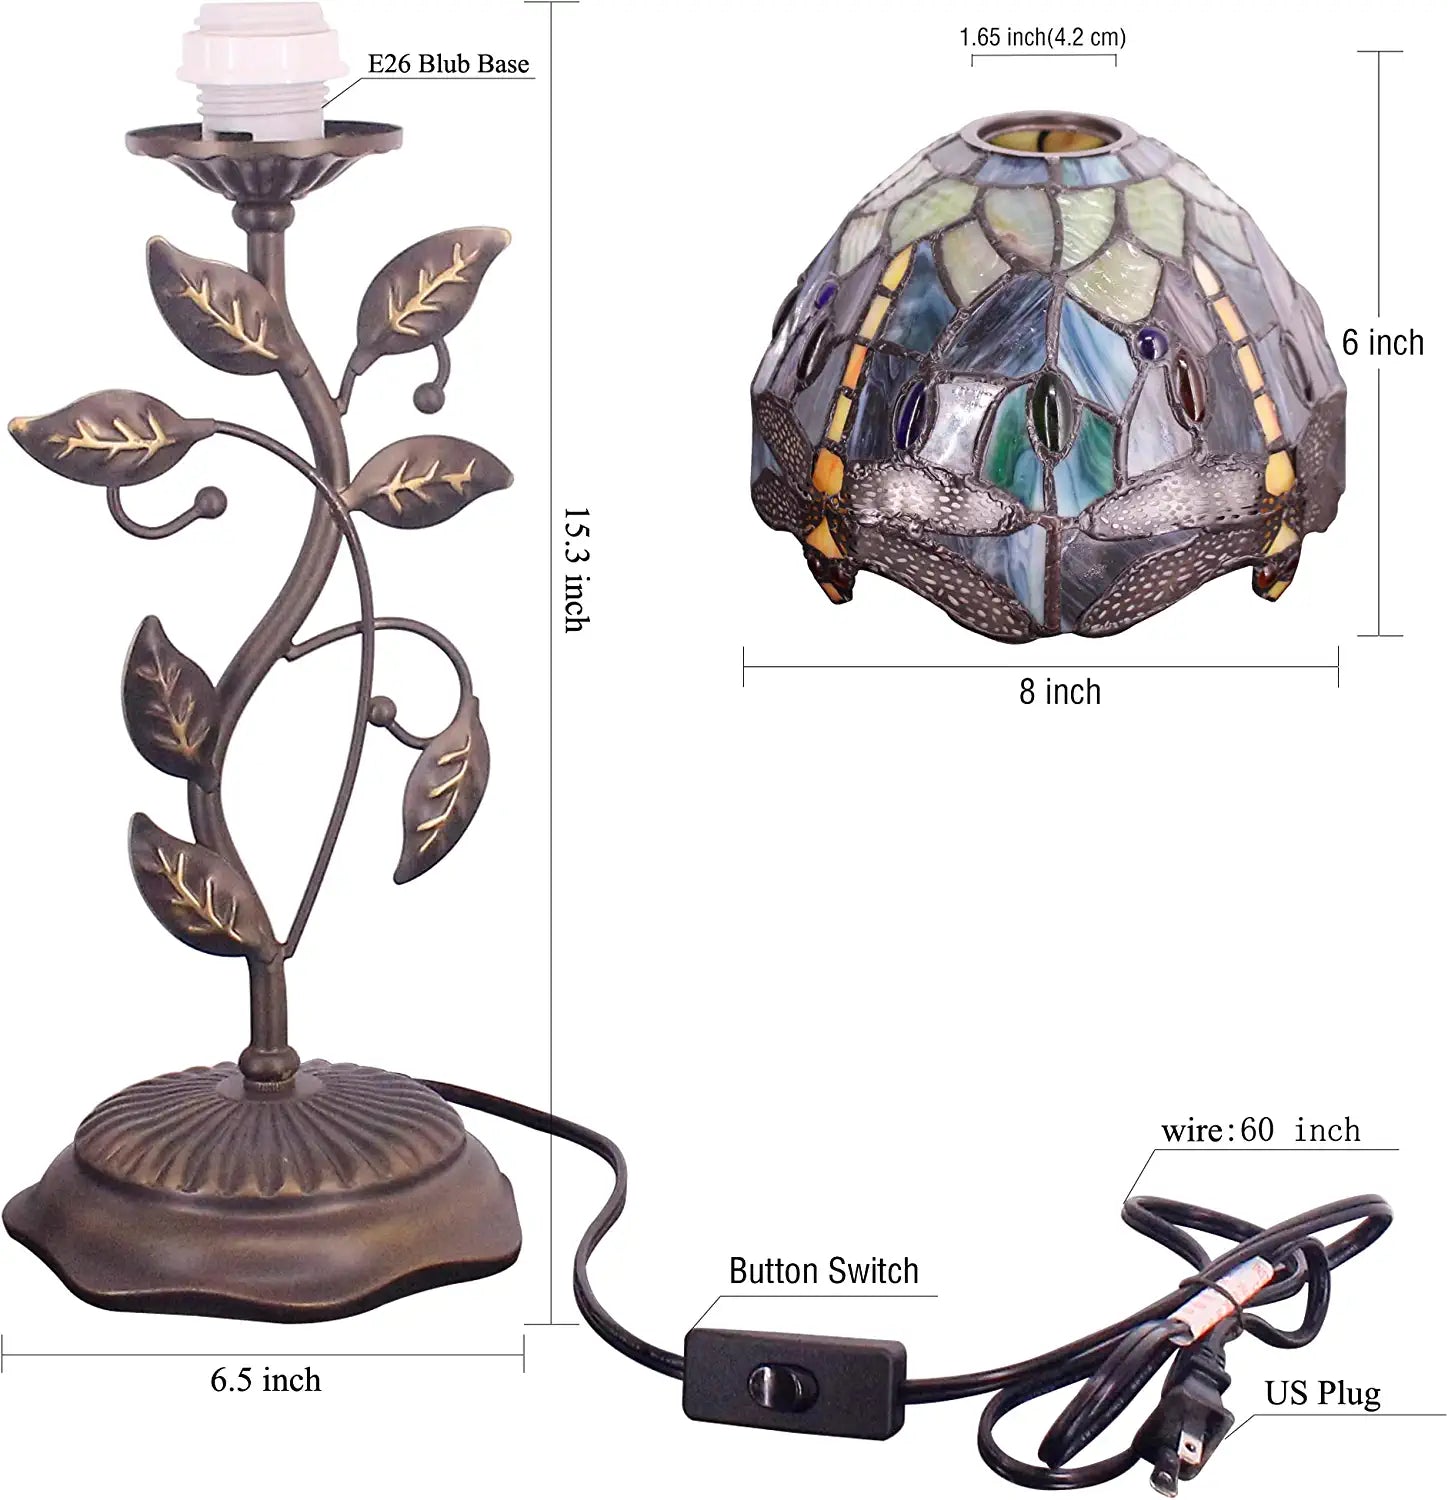 WERFACTORY Small Tiffany Table Lamp 8" Stained Glass Dragonfly Style Shade 19" Tall Antique Vintage Metal Leaf Base Mini Bedside Accent Desk Torchiere Uplight